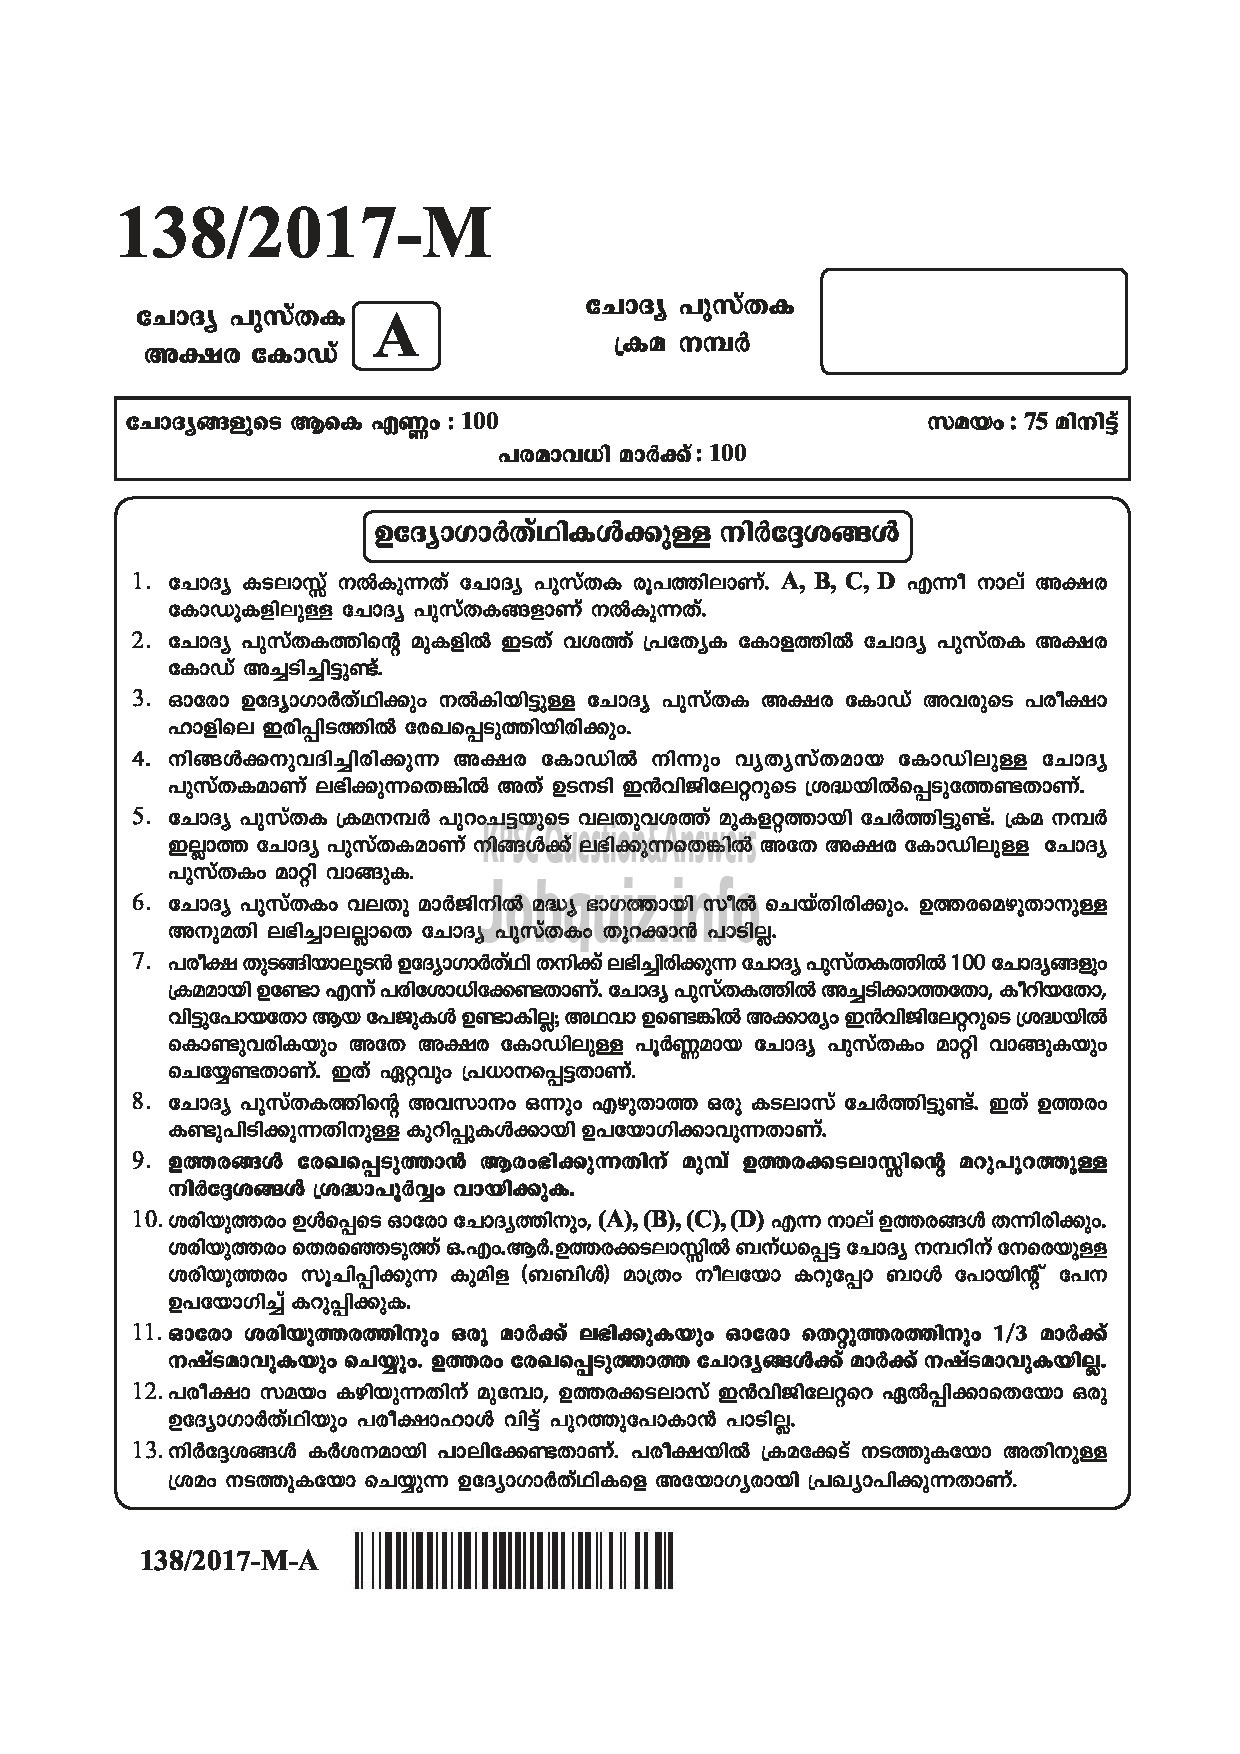 Kerala PSC Question Paper - ASSISTANT PRISON OFFICER MALE JAIL NCA OX MALAYALAM-1